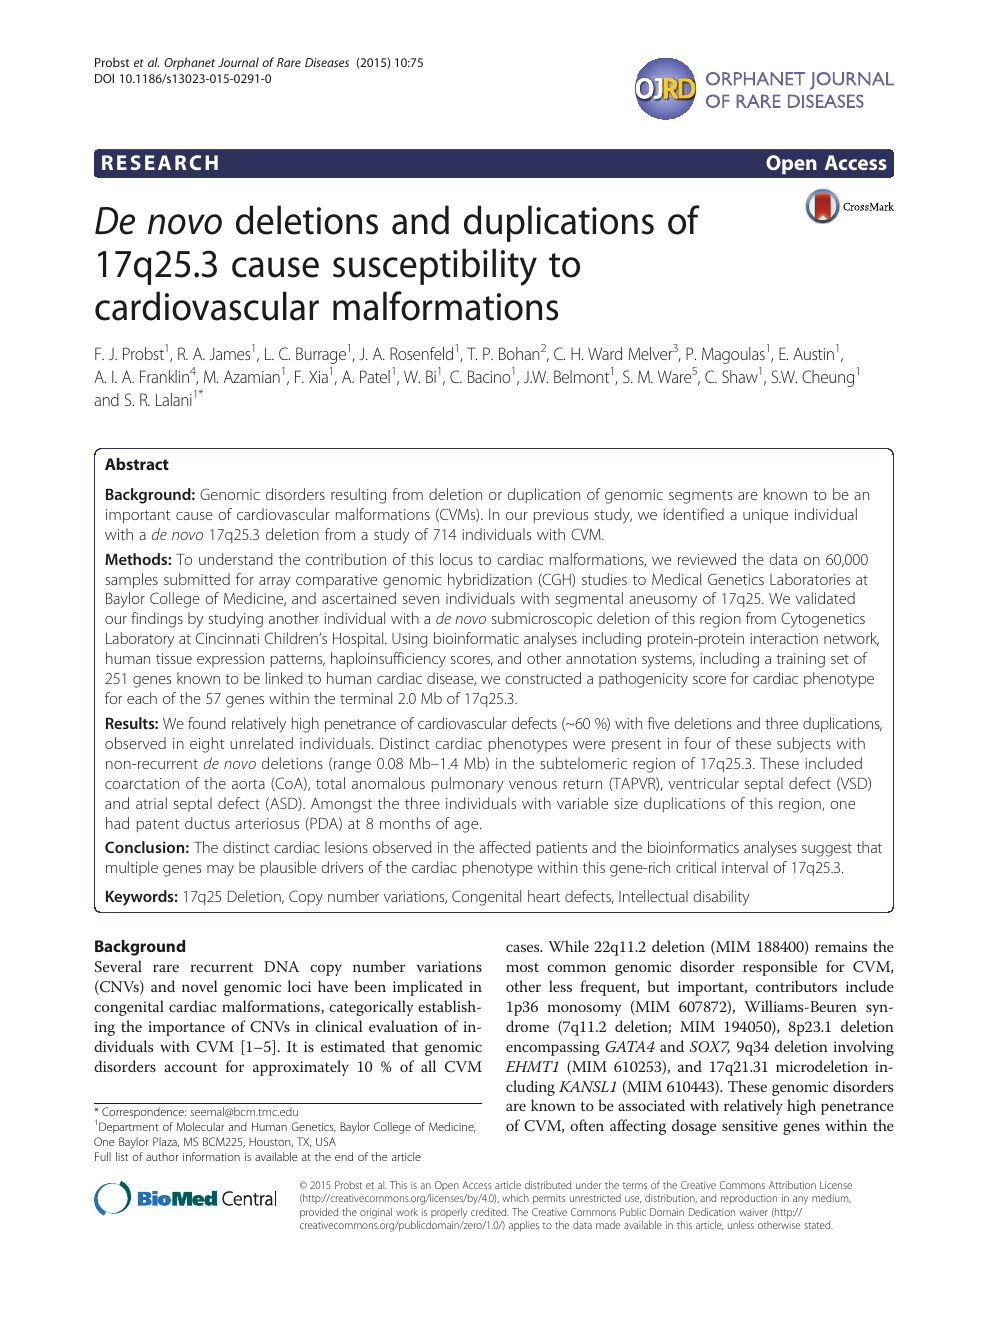 De Novo Deletions And Duplications Of 17q25 3 Cause Susceptibility To Cardiovascular Malformations Topic Of Research Paper In Clinical Medicine Download Scholarly Article Pdf And Read For Free On Cyberleninka Open Science